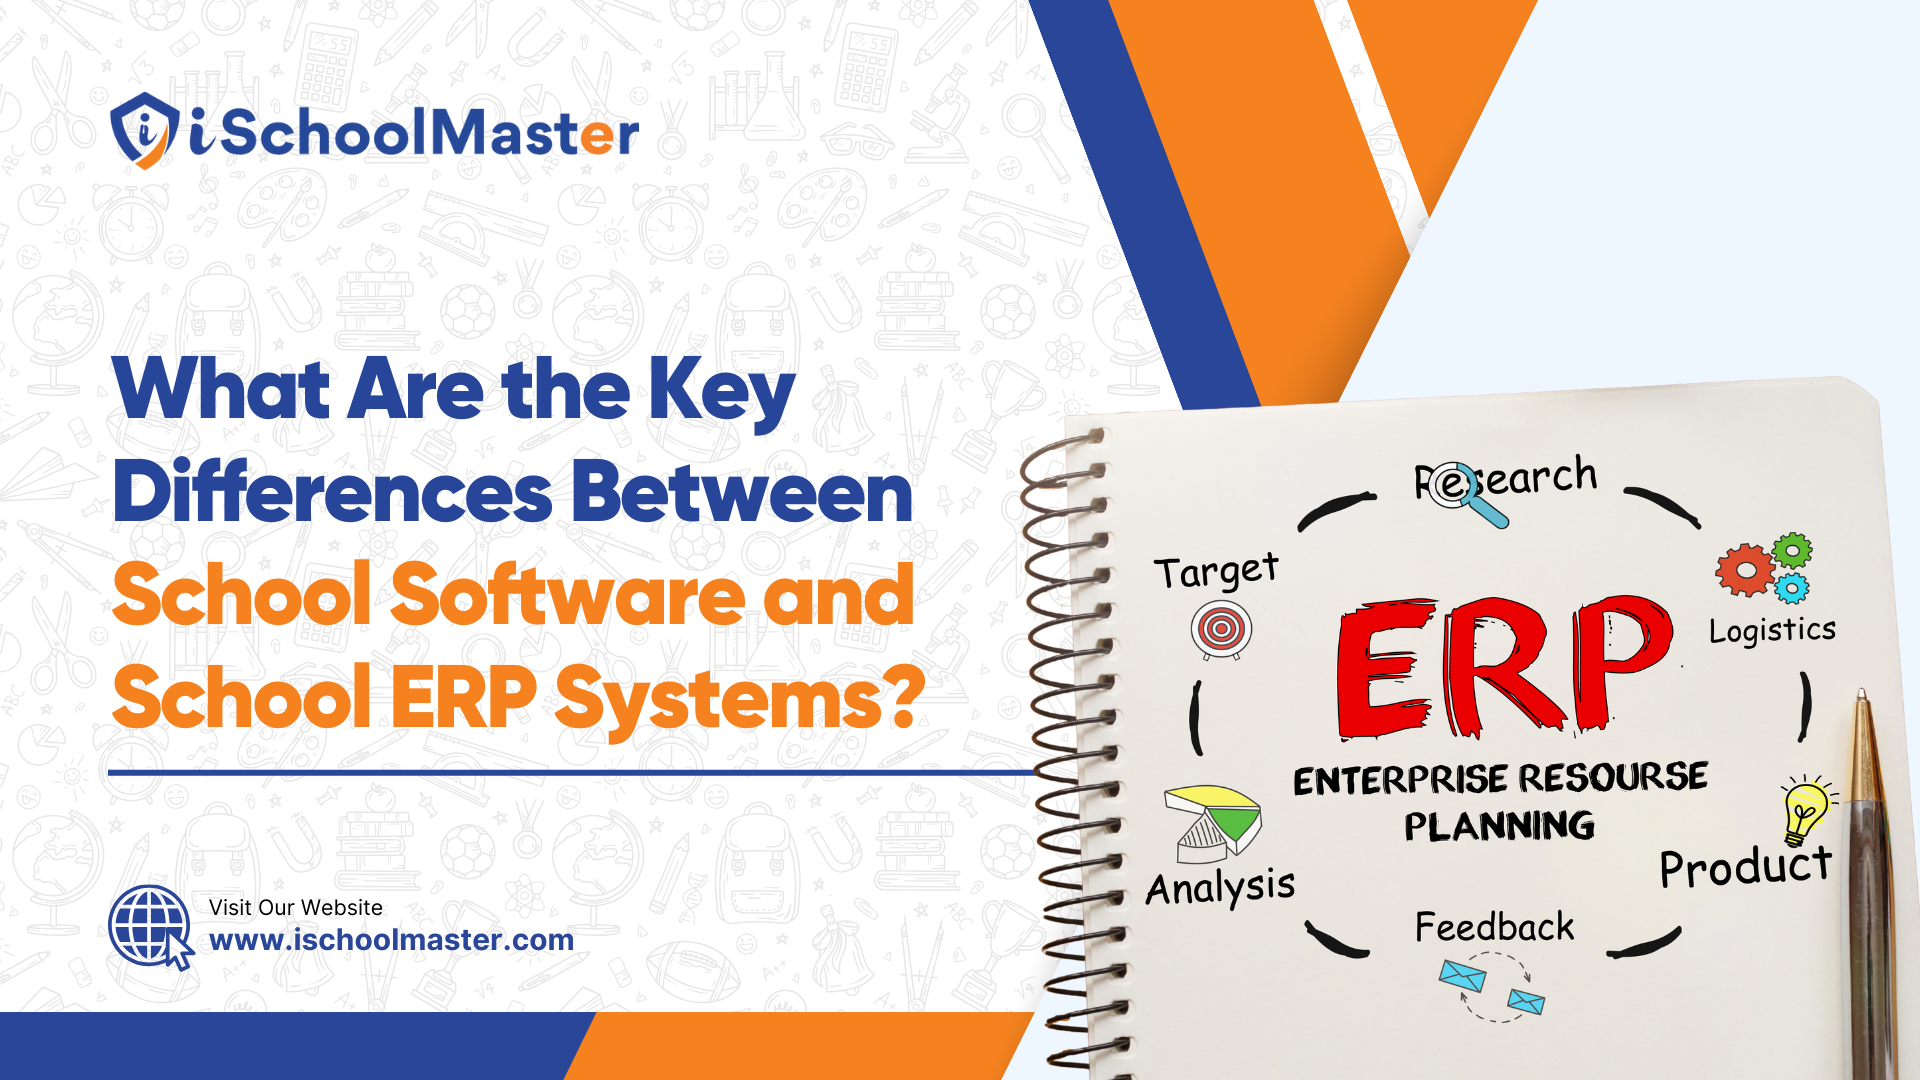 Key Differences Between School Software and School ERP Systems